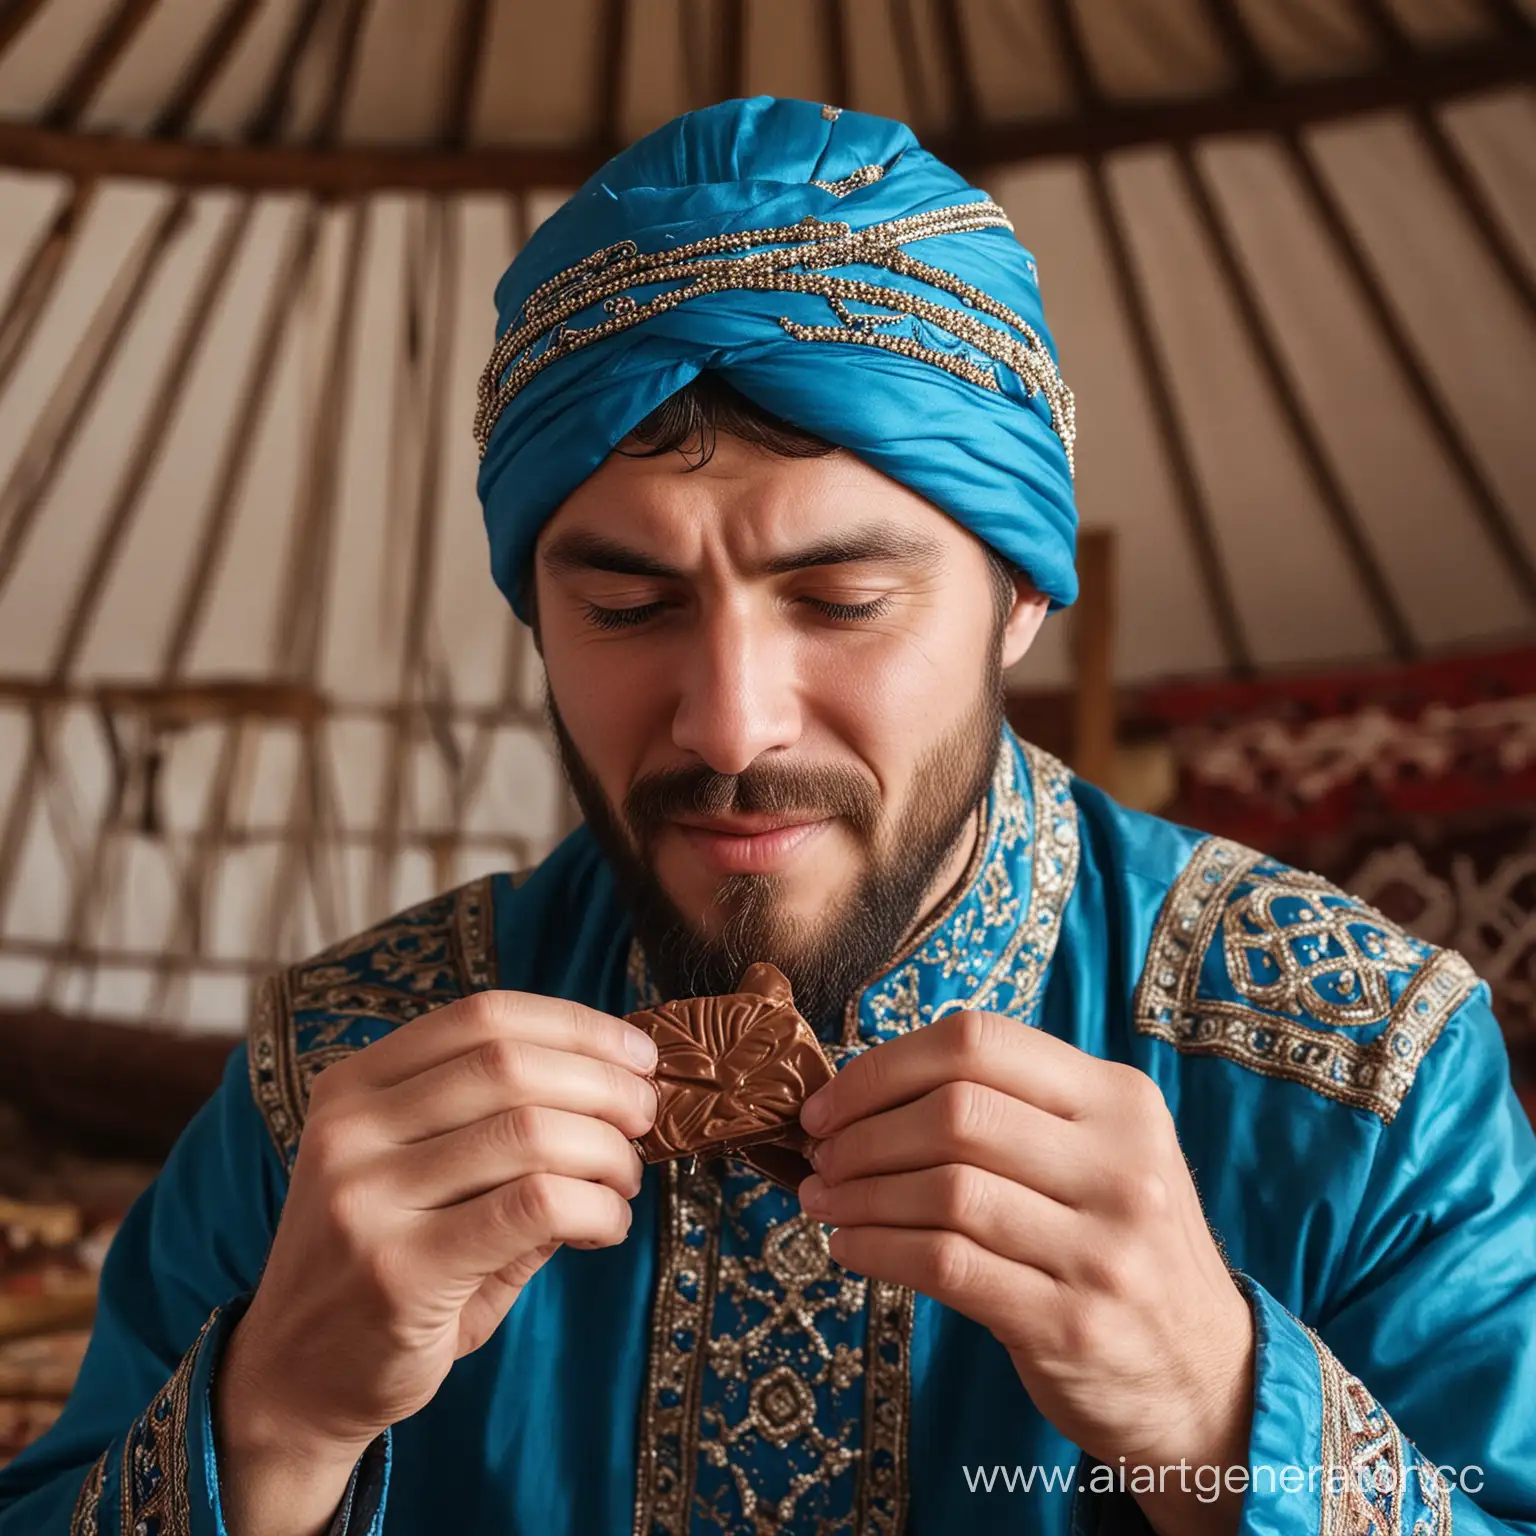 A man in a close-up in a yurt eats chocolate in a blue wrapper with Kazakh ornaments